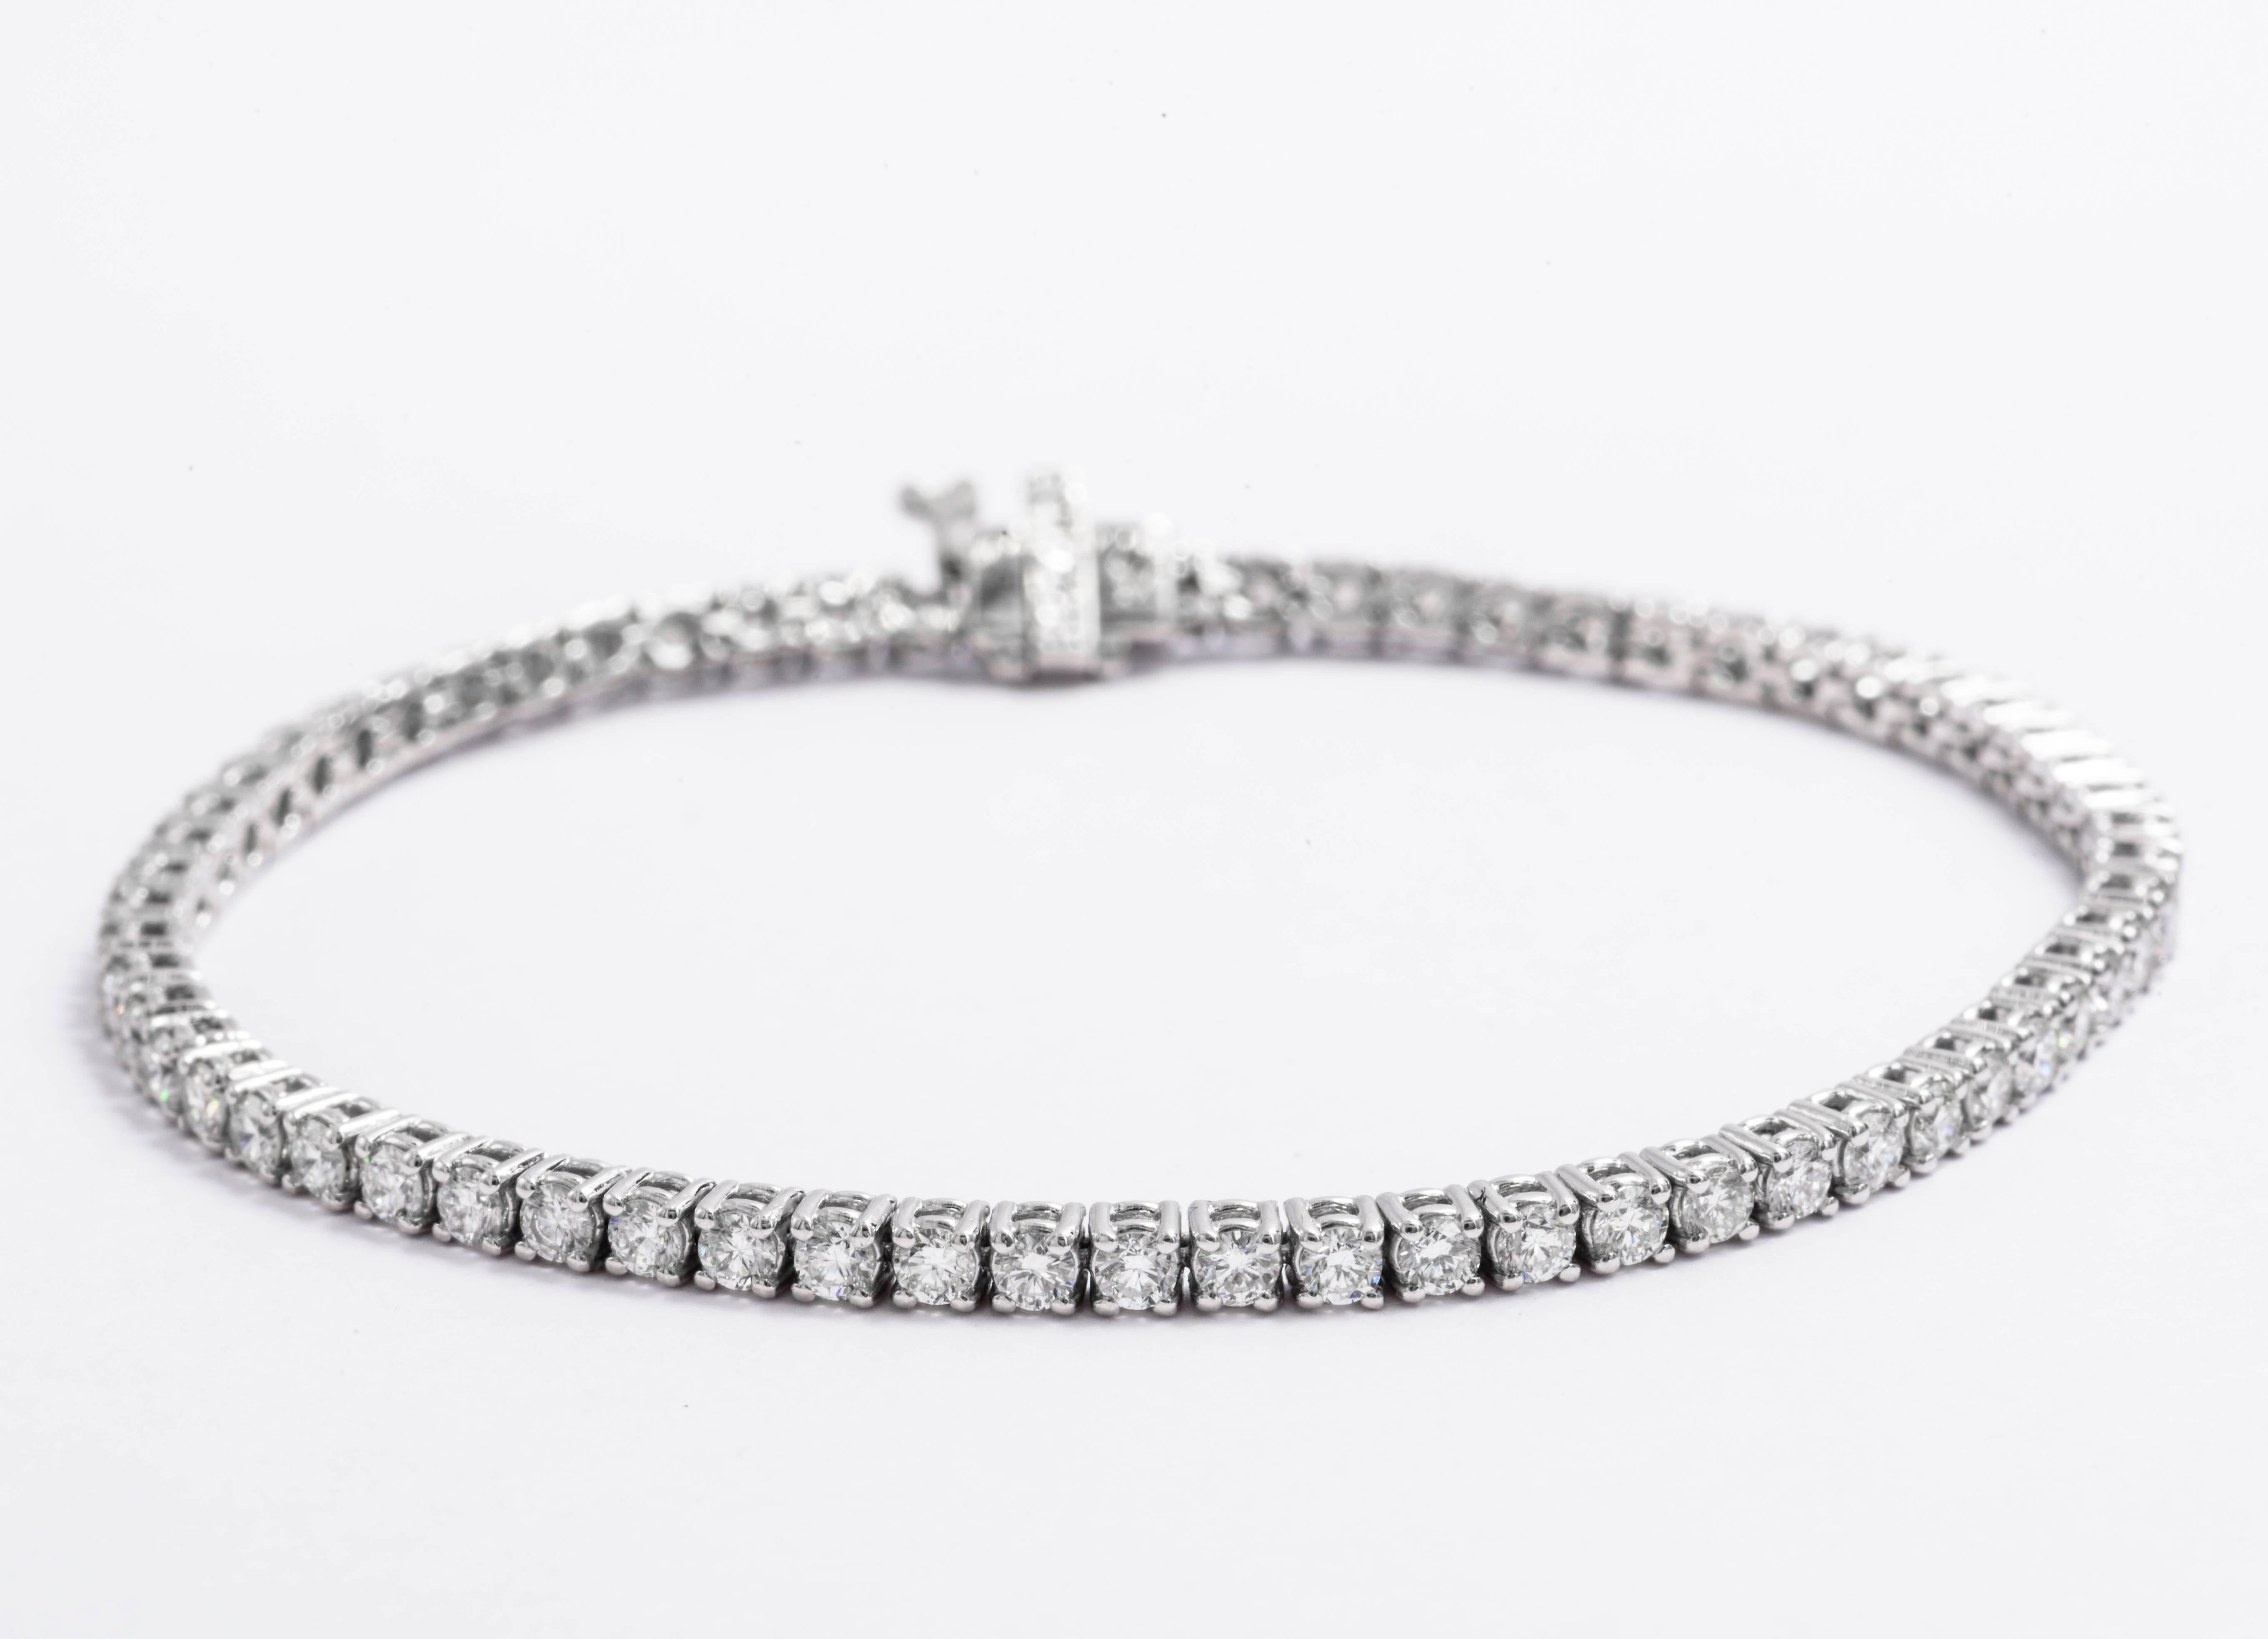 14 Karat White Gold diamond tennis bracelet featuring 57 round brilliants weighing 4 Carats.
Color G-H
Clarity SI

Can be made in 18 Karat White Gold or Yellow Gold
DM for pricing.

In stock 1-22 Carat Tennis bracelets.